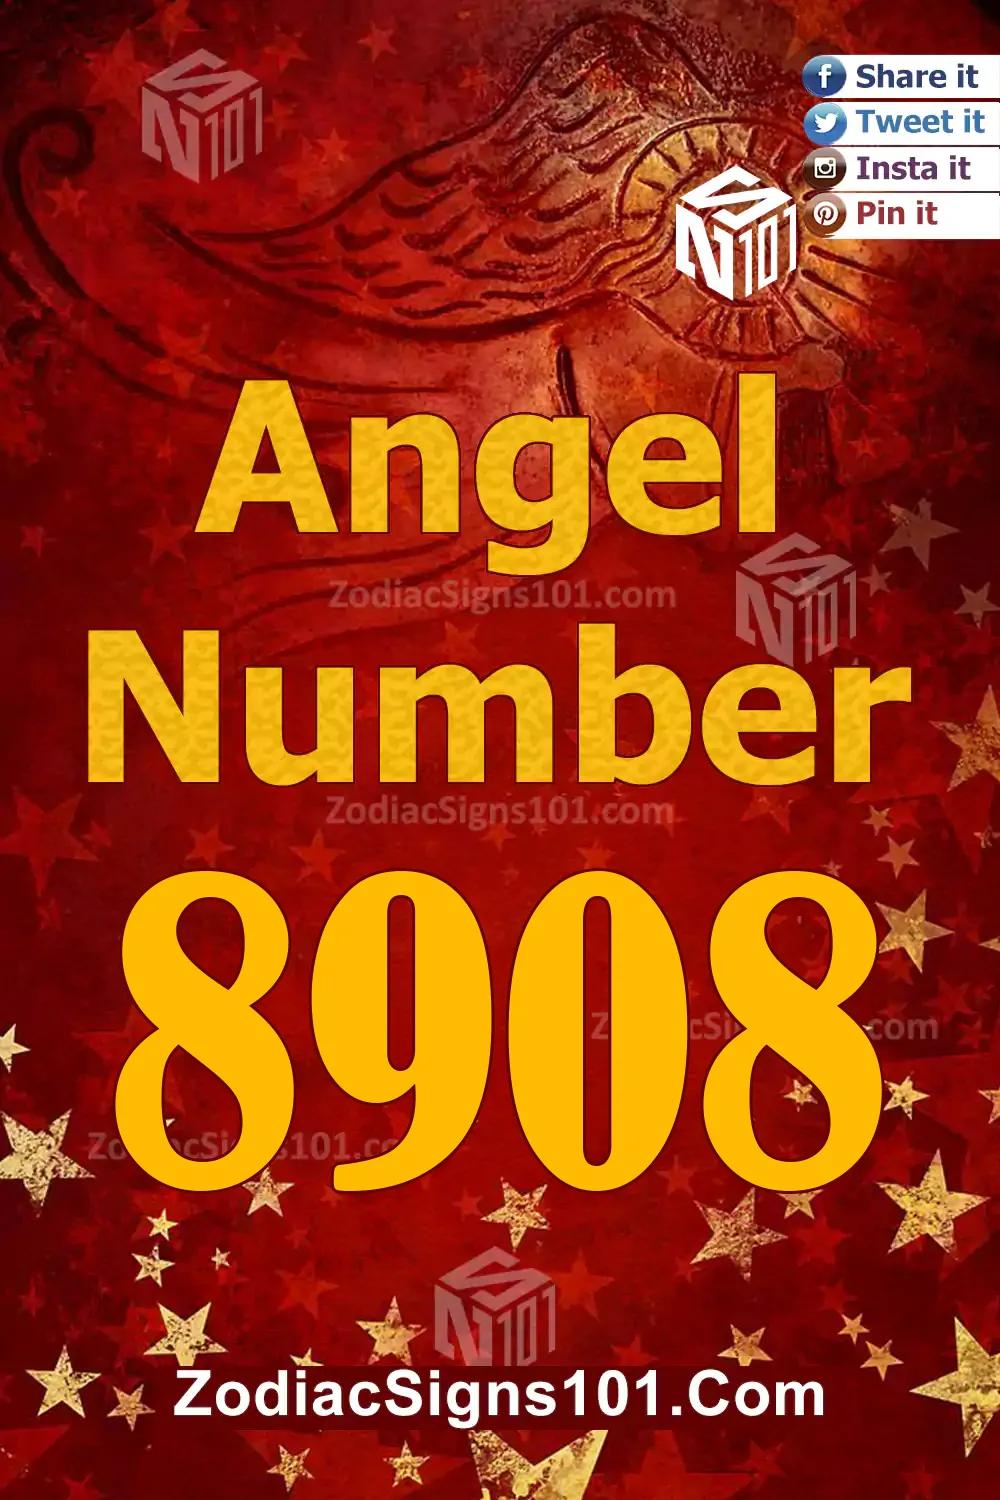 8908 Angel Number Meaning